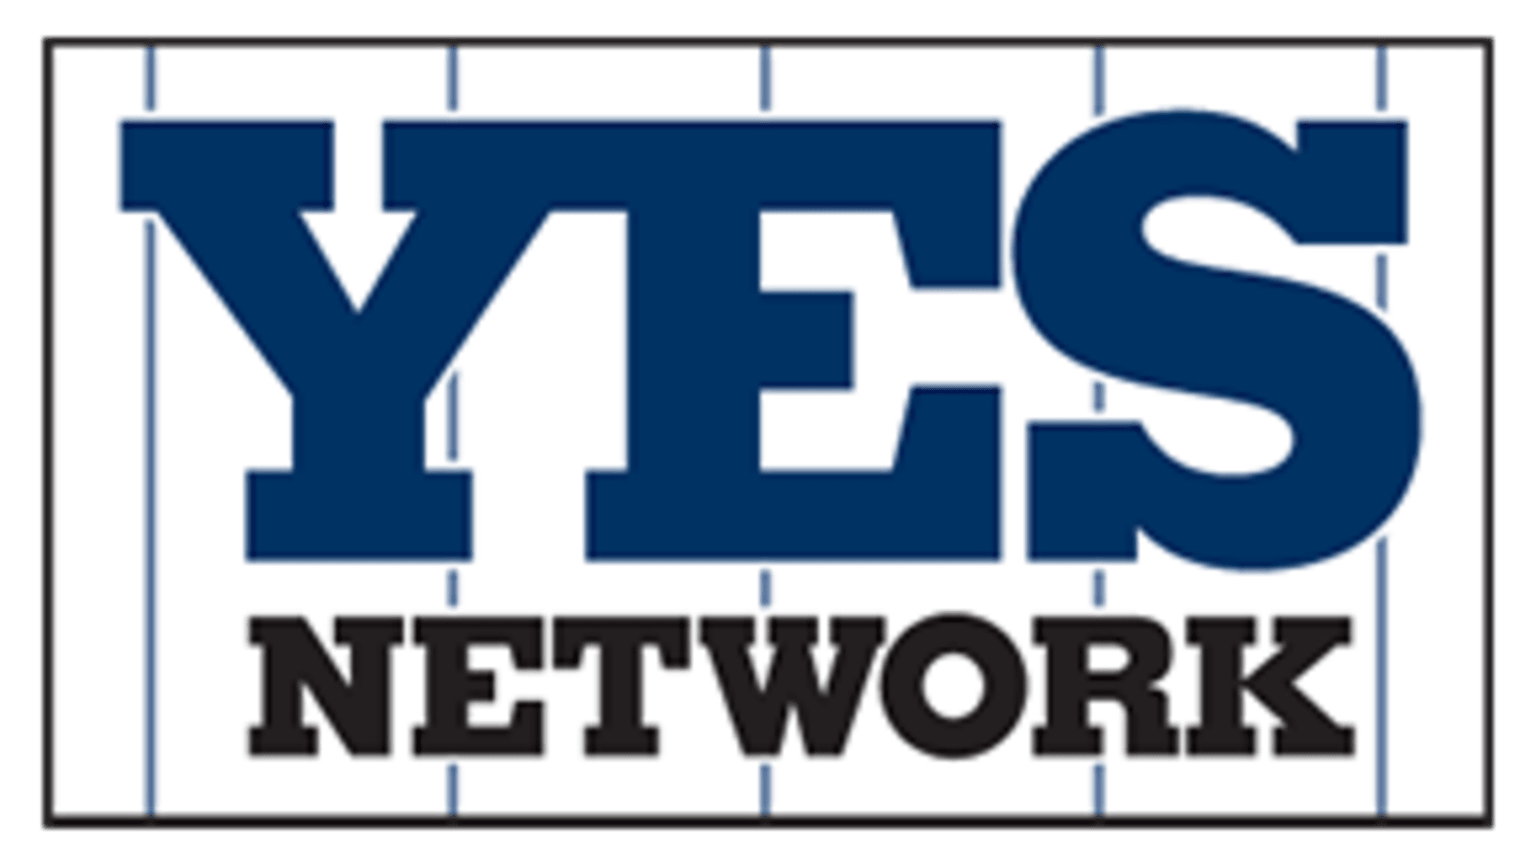 YES Network interested in hiring former New York Yankees